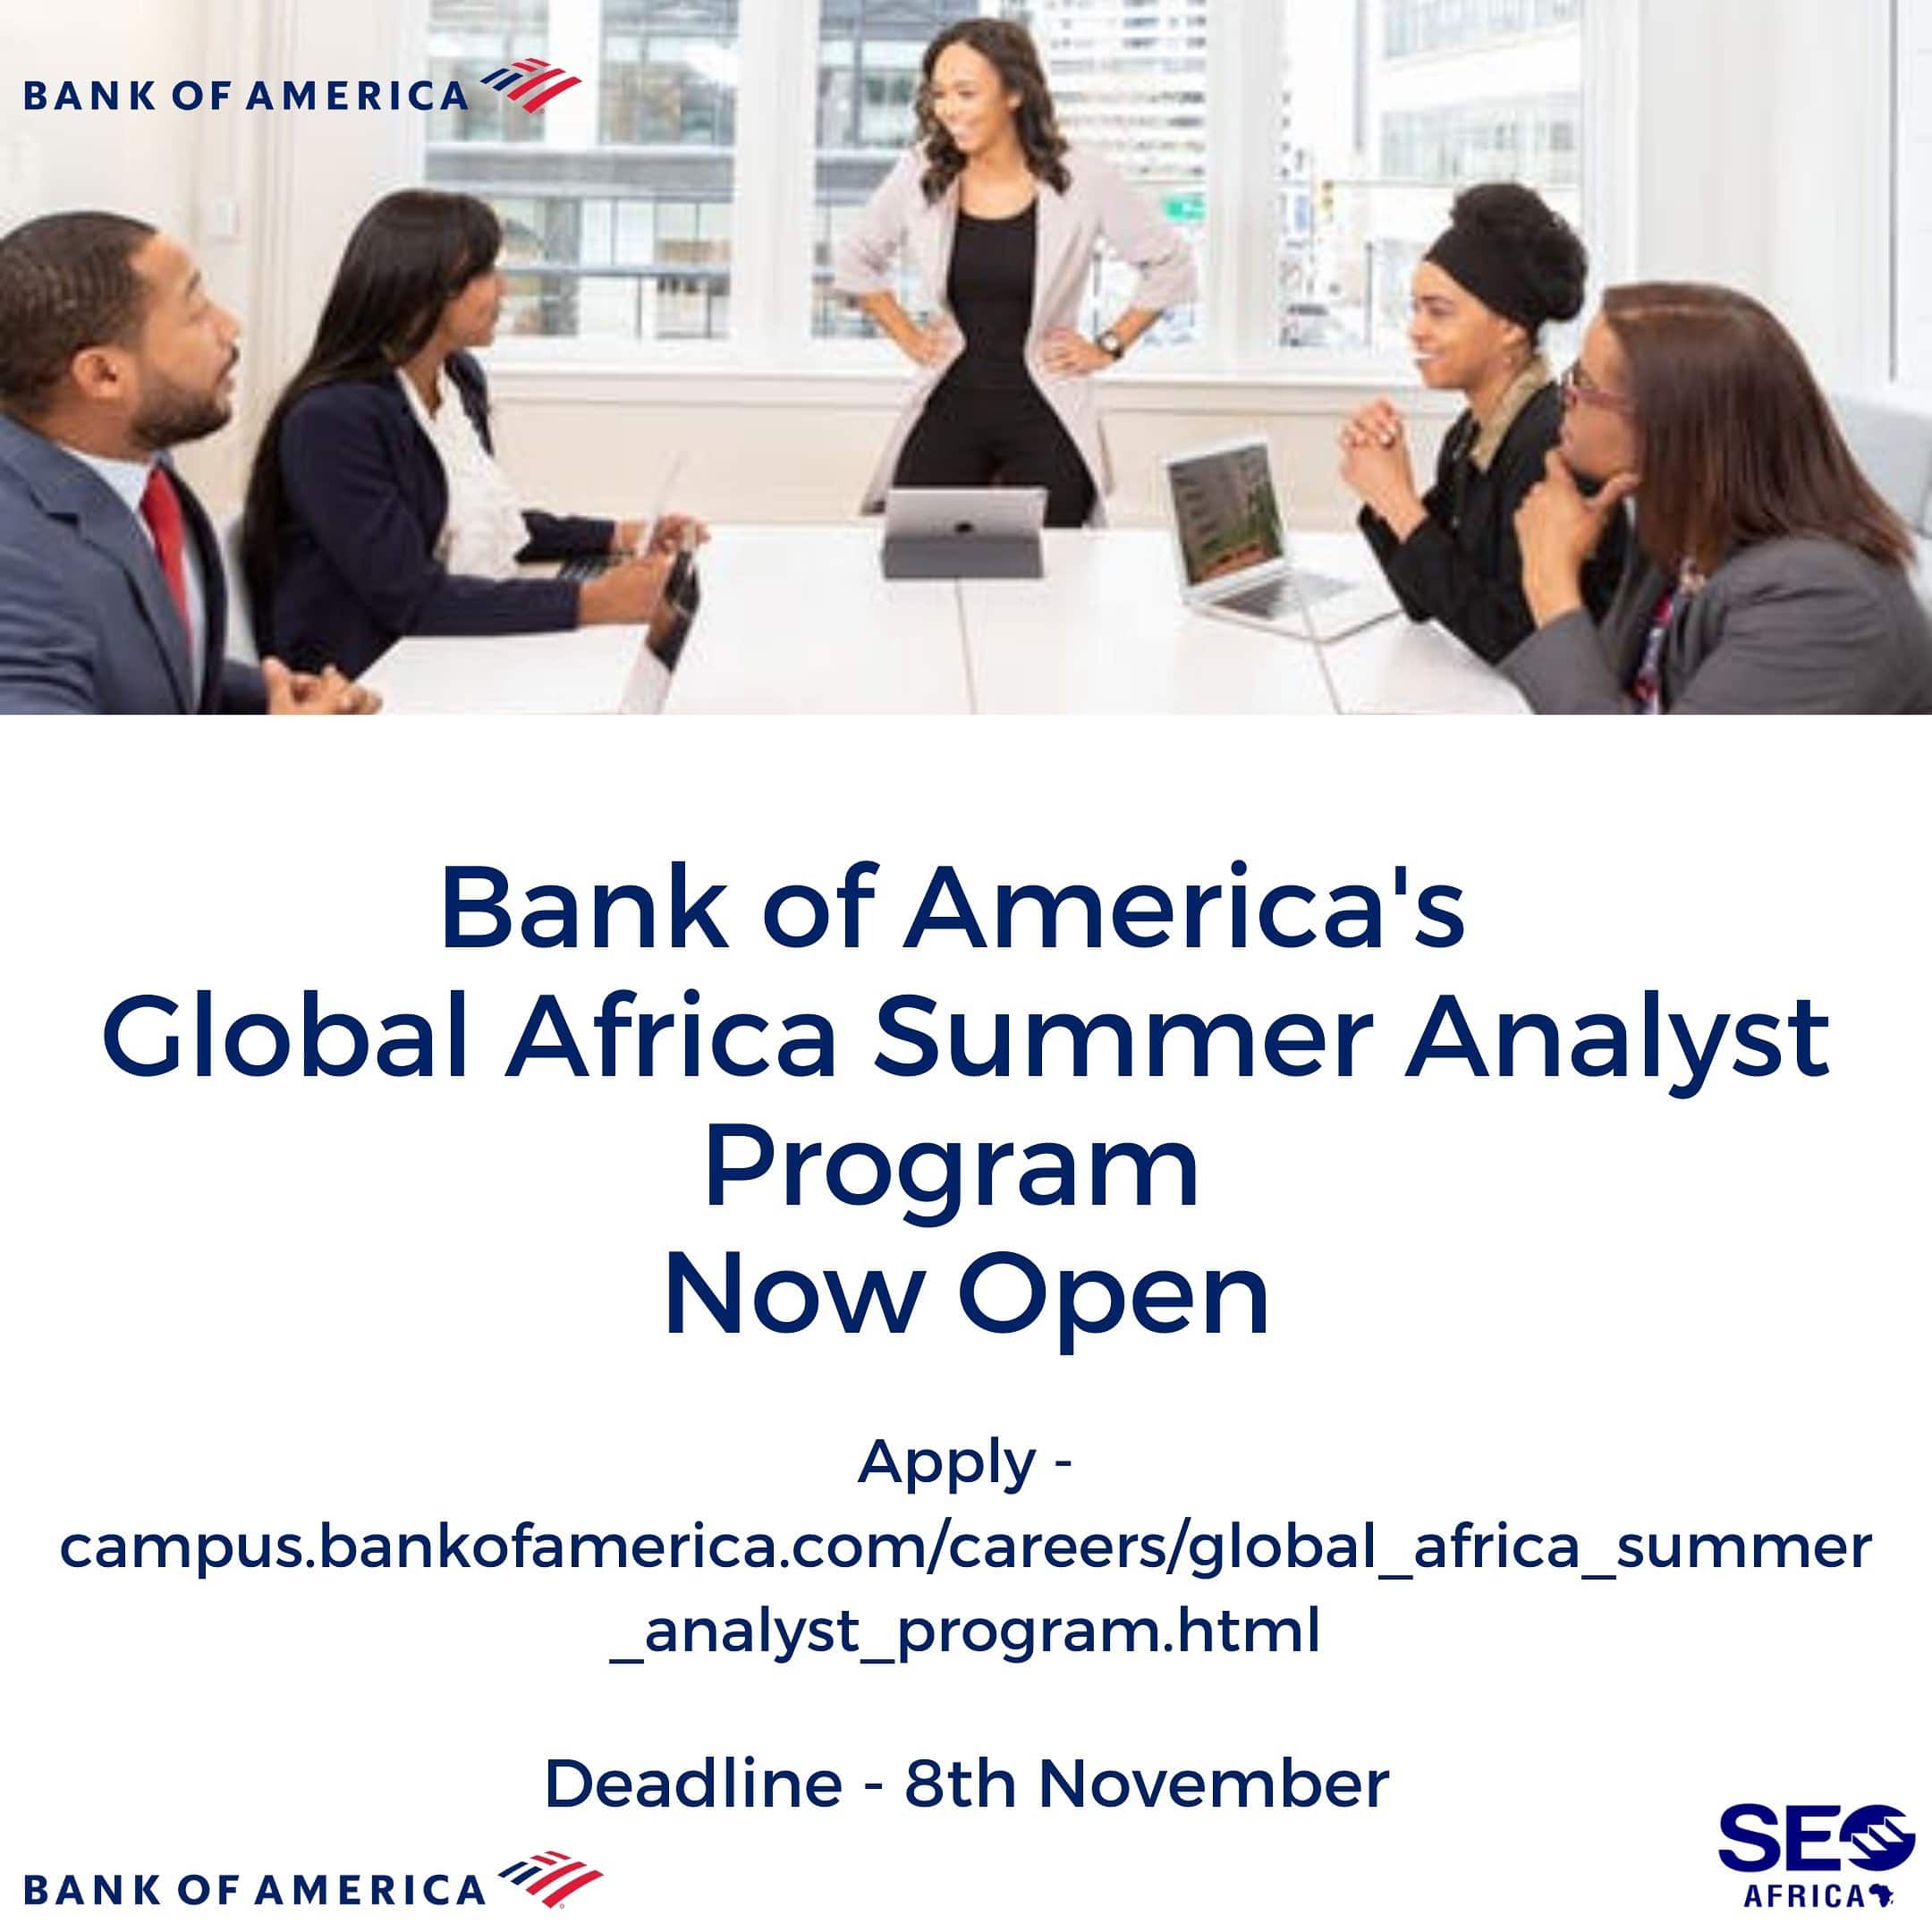 Bank of America Global Africa Summer Analyst Program 2022 for African Students